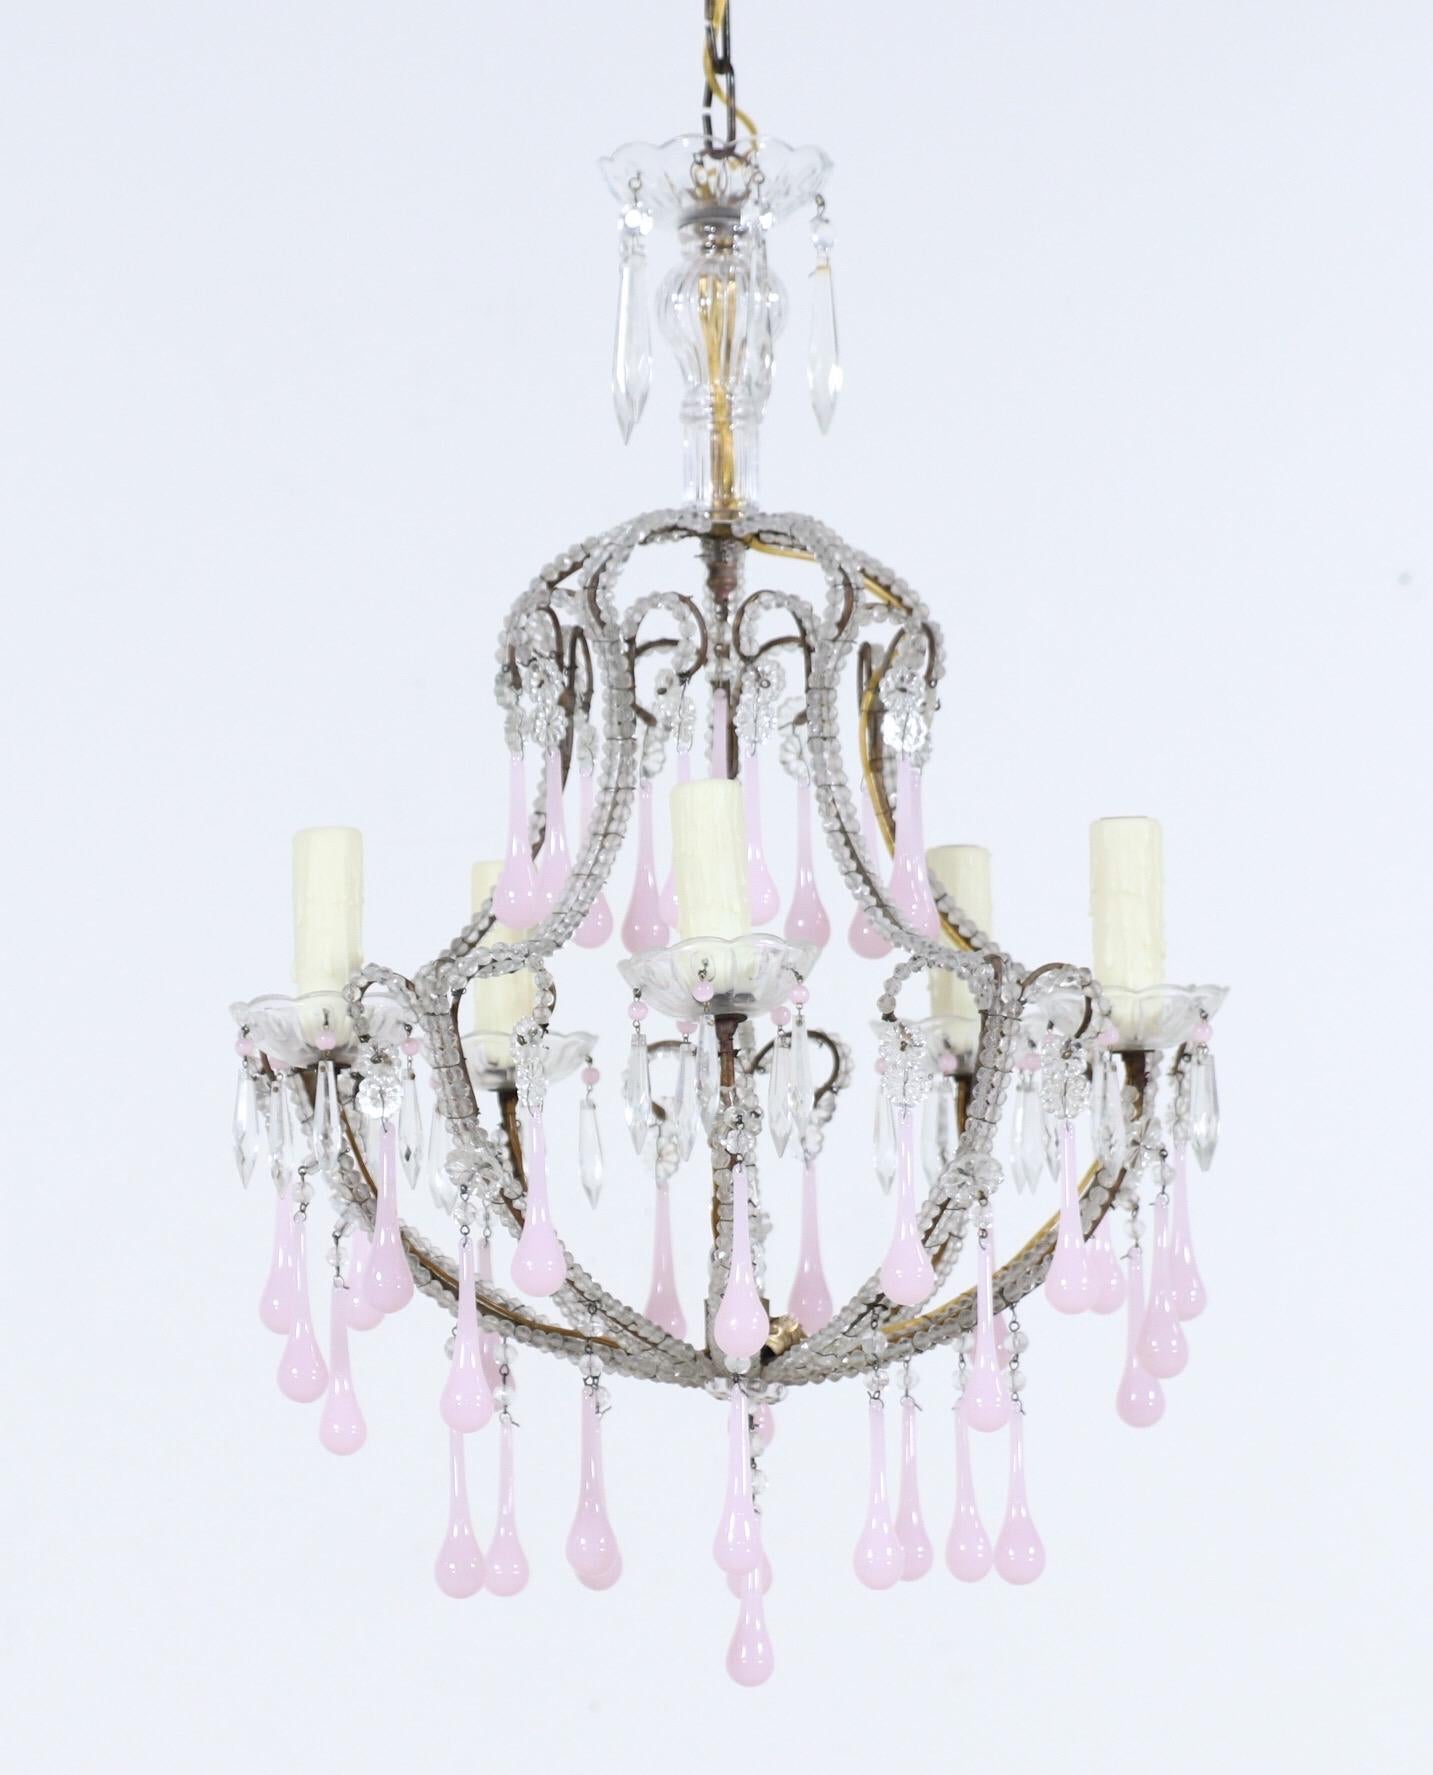 Very pretty, 1950s Italian crystal beaded chandelier with pink opaline glass drops. 

The chandelier consists of a shapely iron frame with a naturally-distressed gilt finish and original “English cut” beading on the arms. The pink opaline drops add